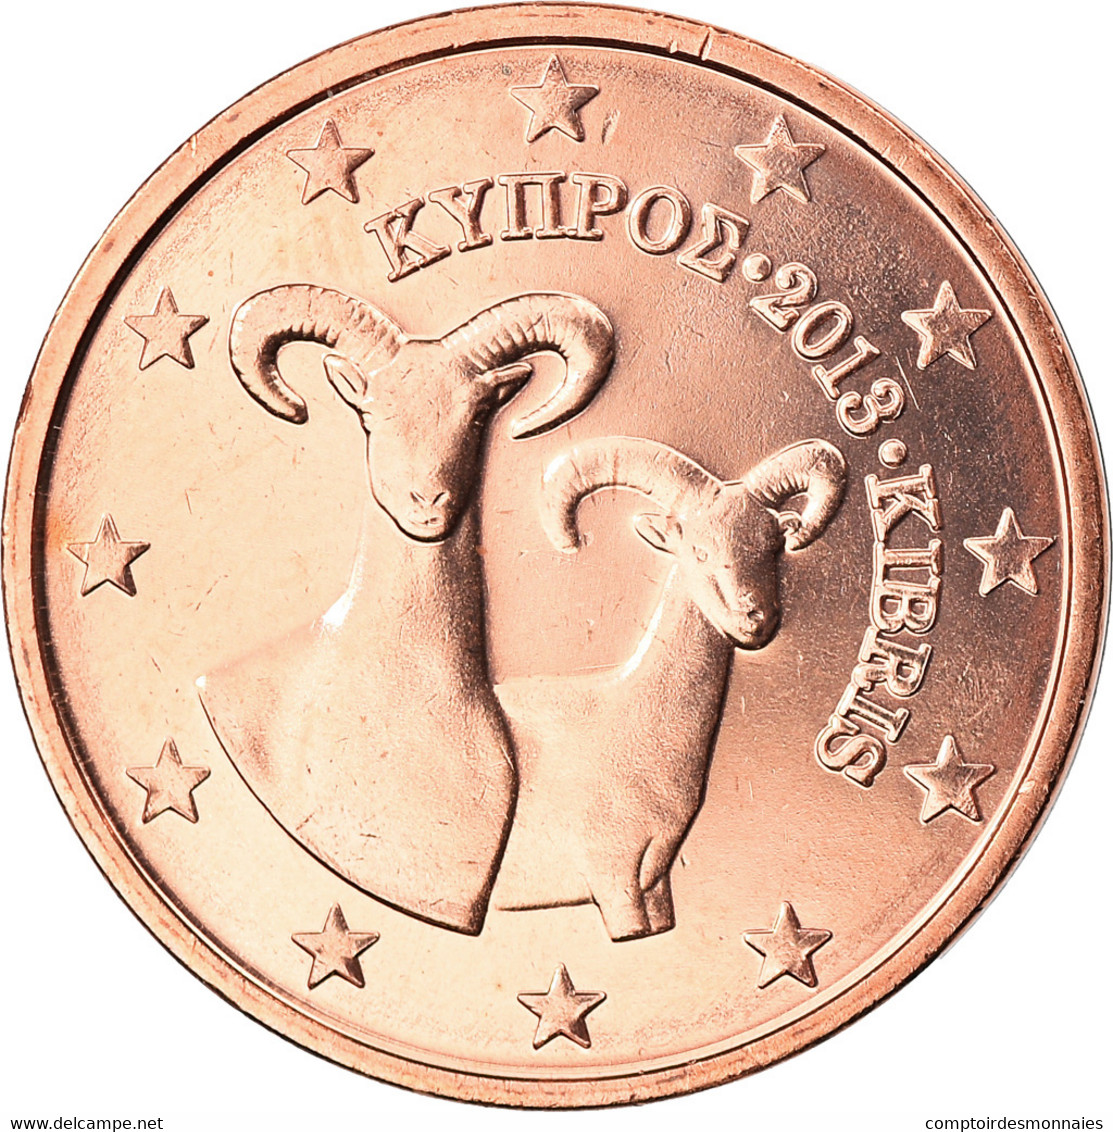 Chypre, 2 Euro Cent, 2013, SPL, Copper Plated Steel, KM:New - Chypre